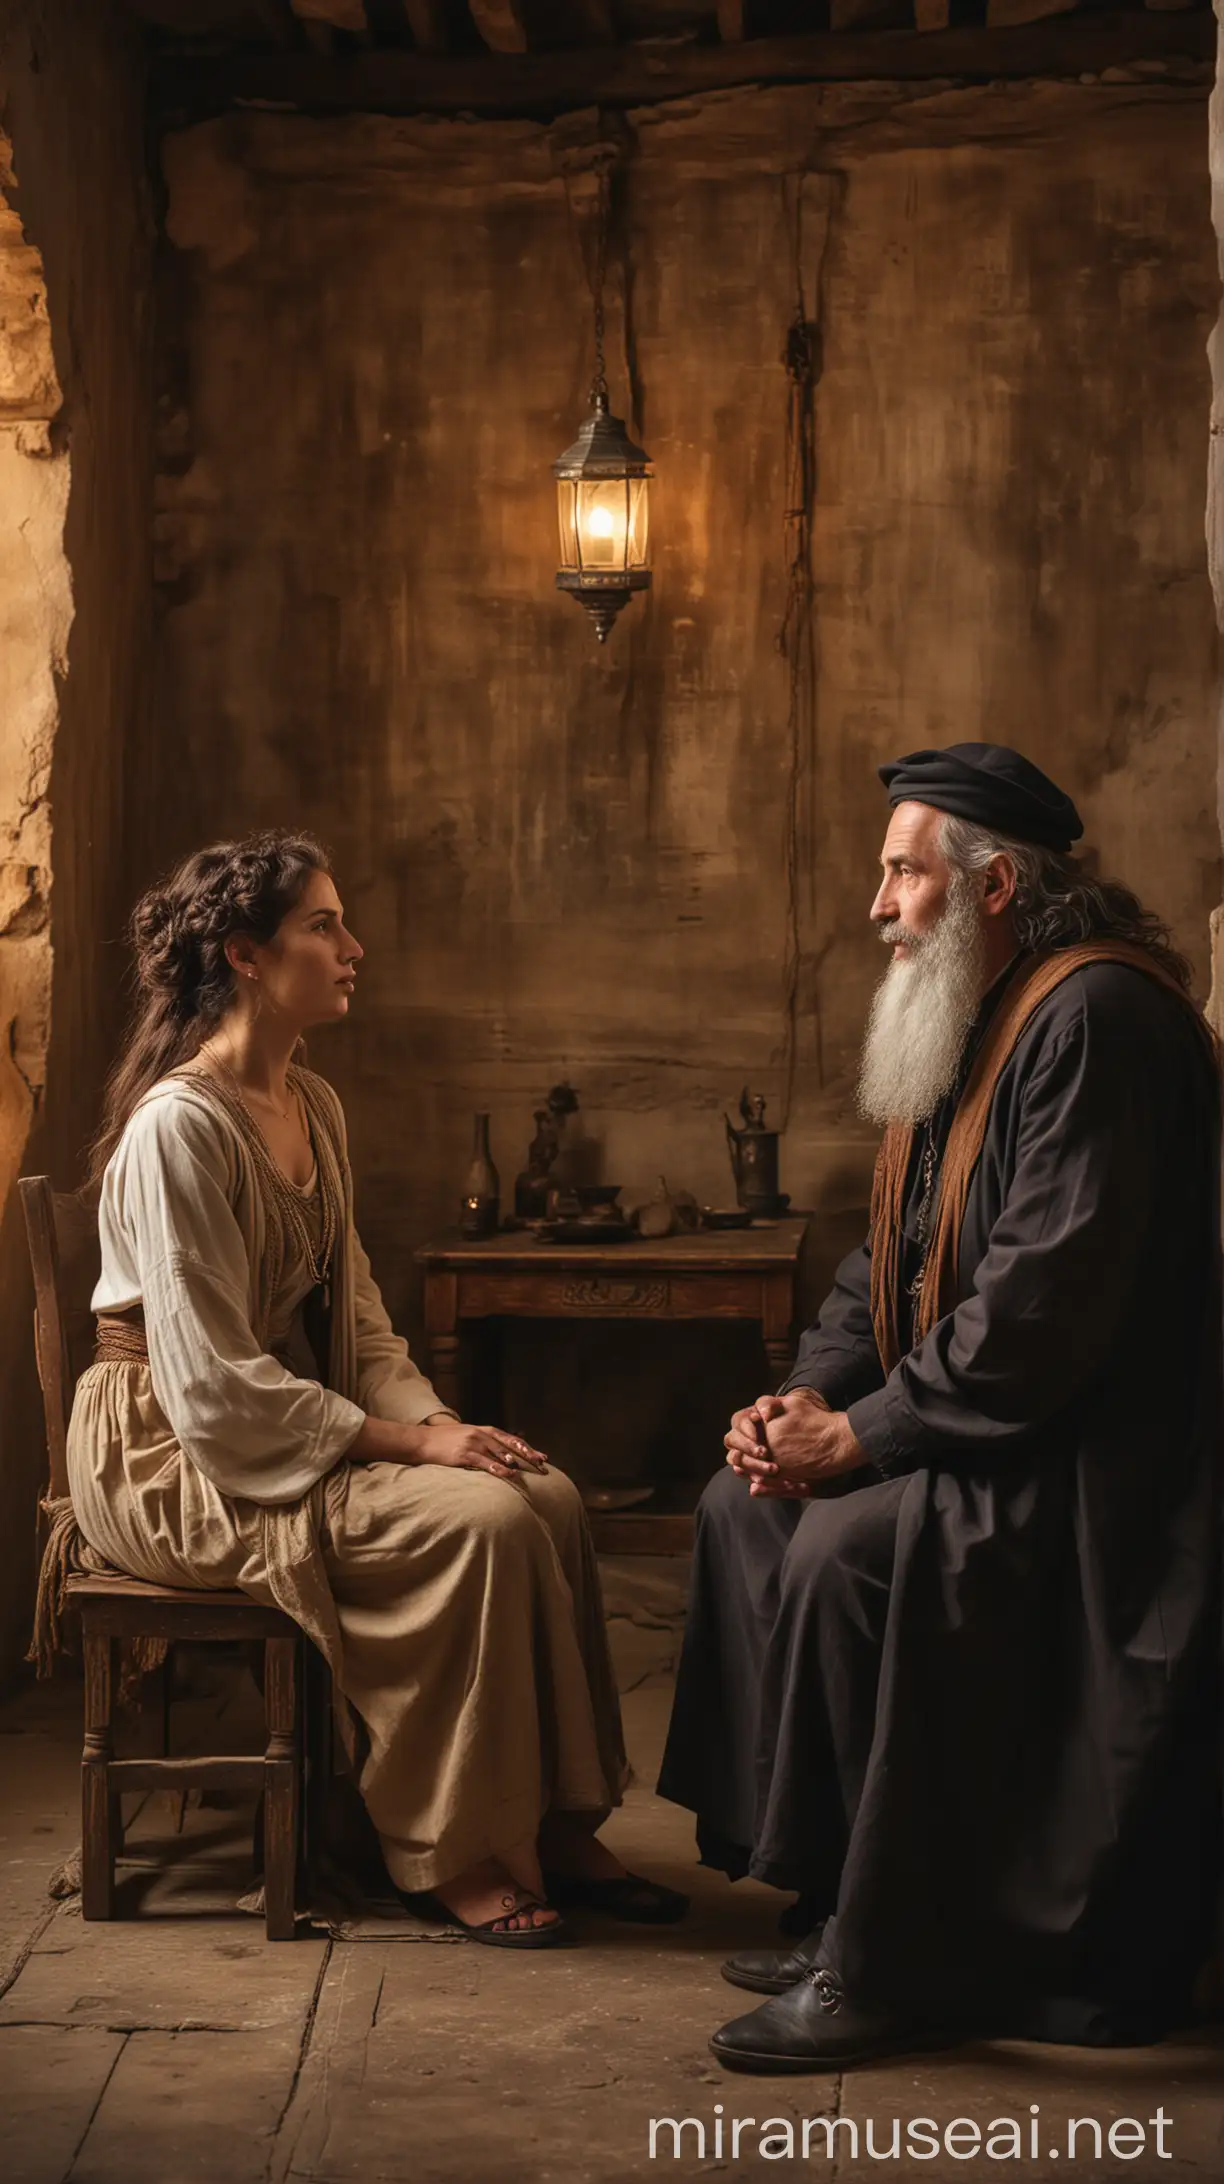 Jewish Woman and Man Conversing in Ancient Dimly Lit Room